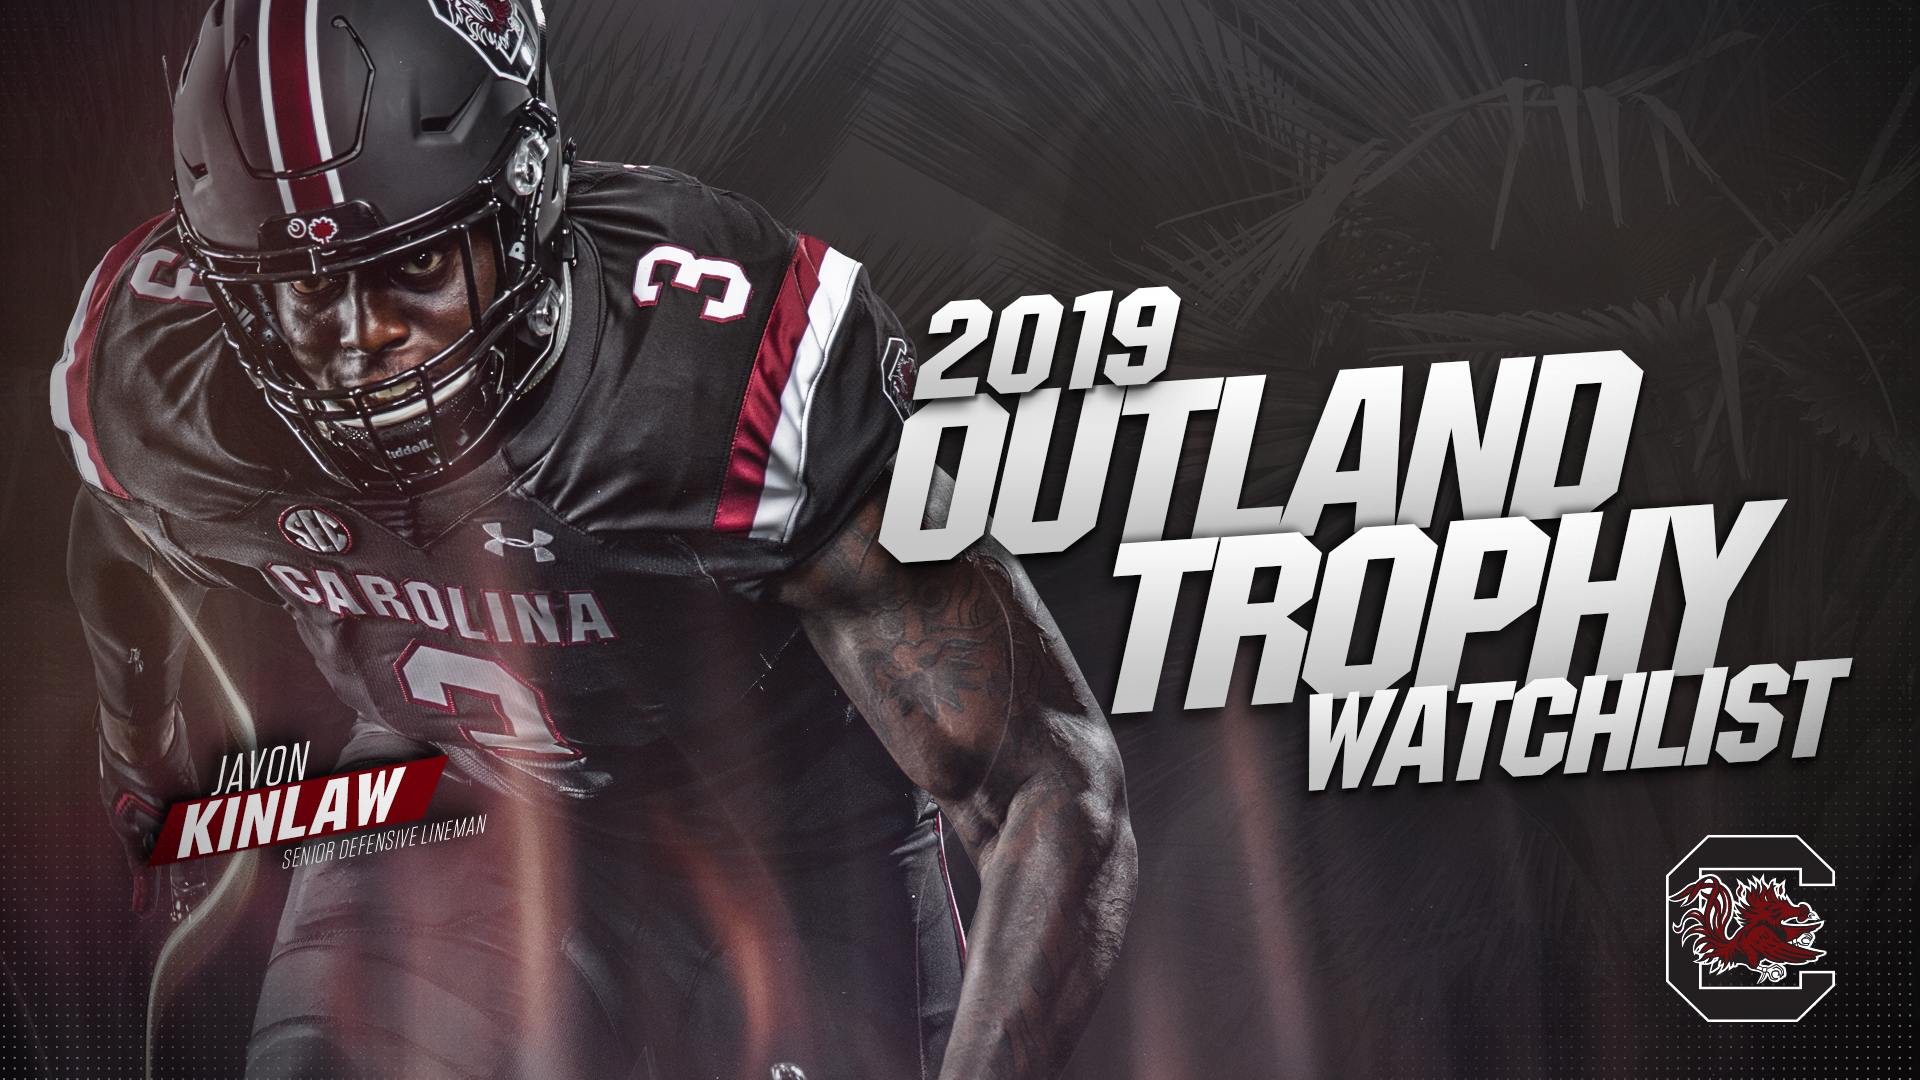 Kinlaw Named to Outland Trophy Watch List